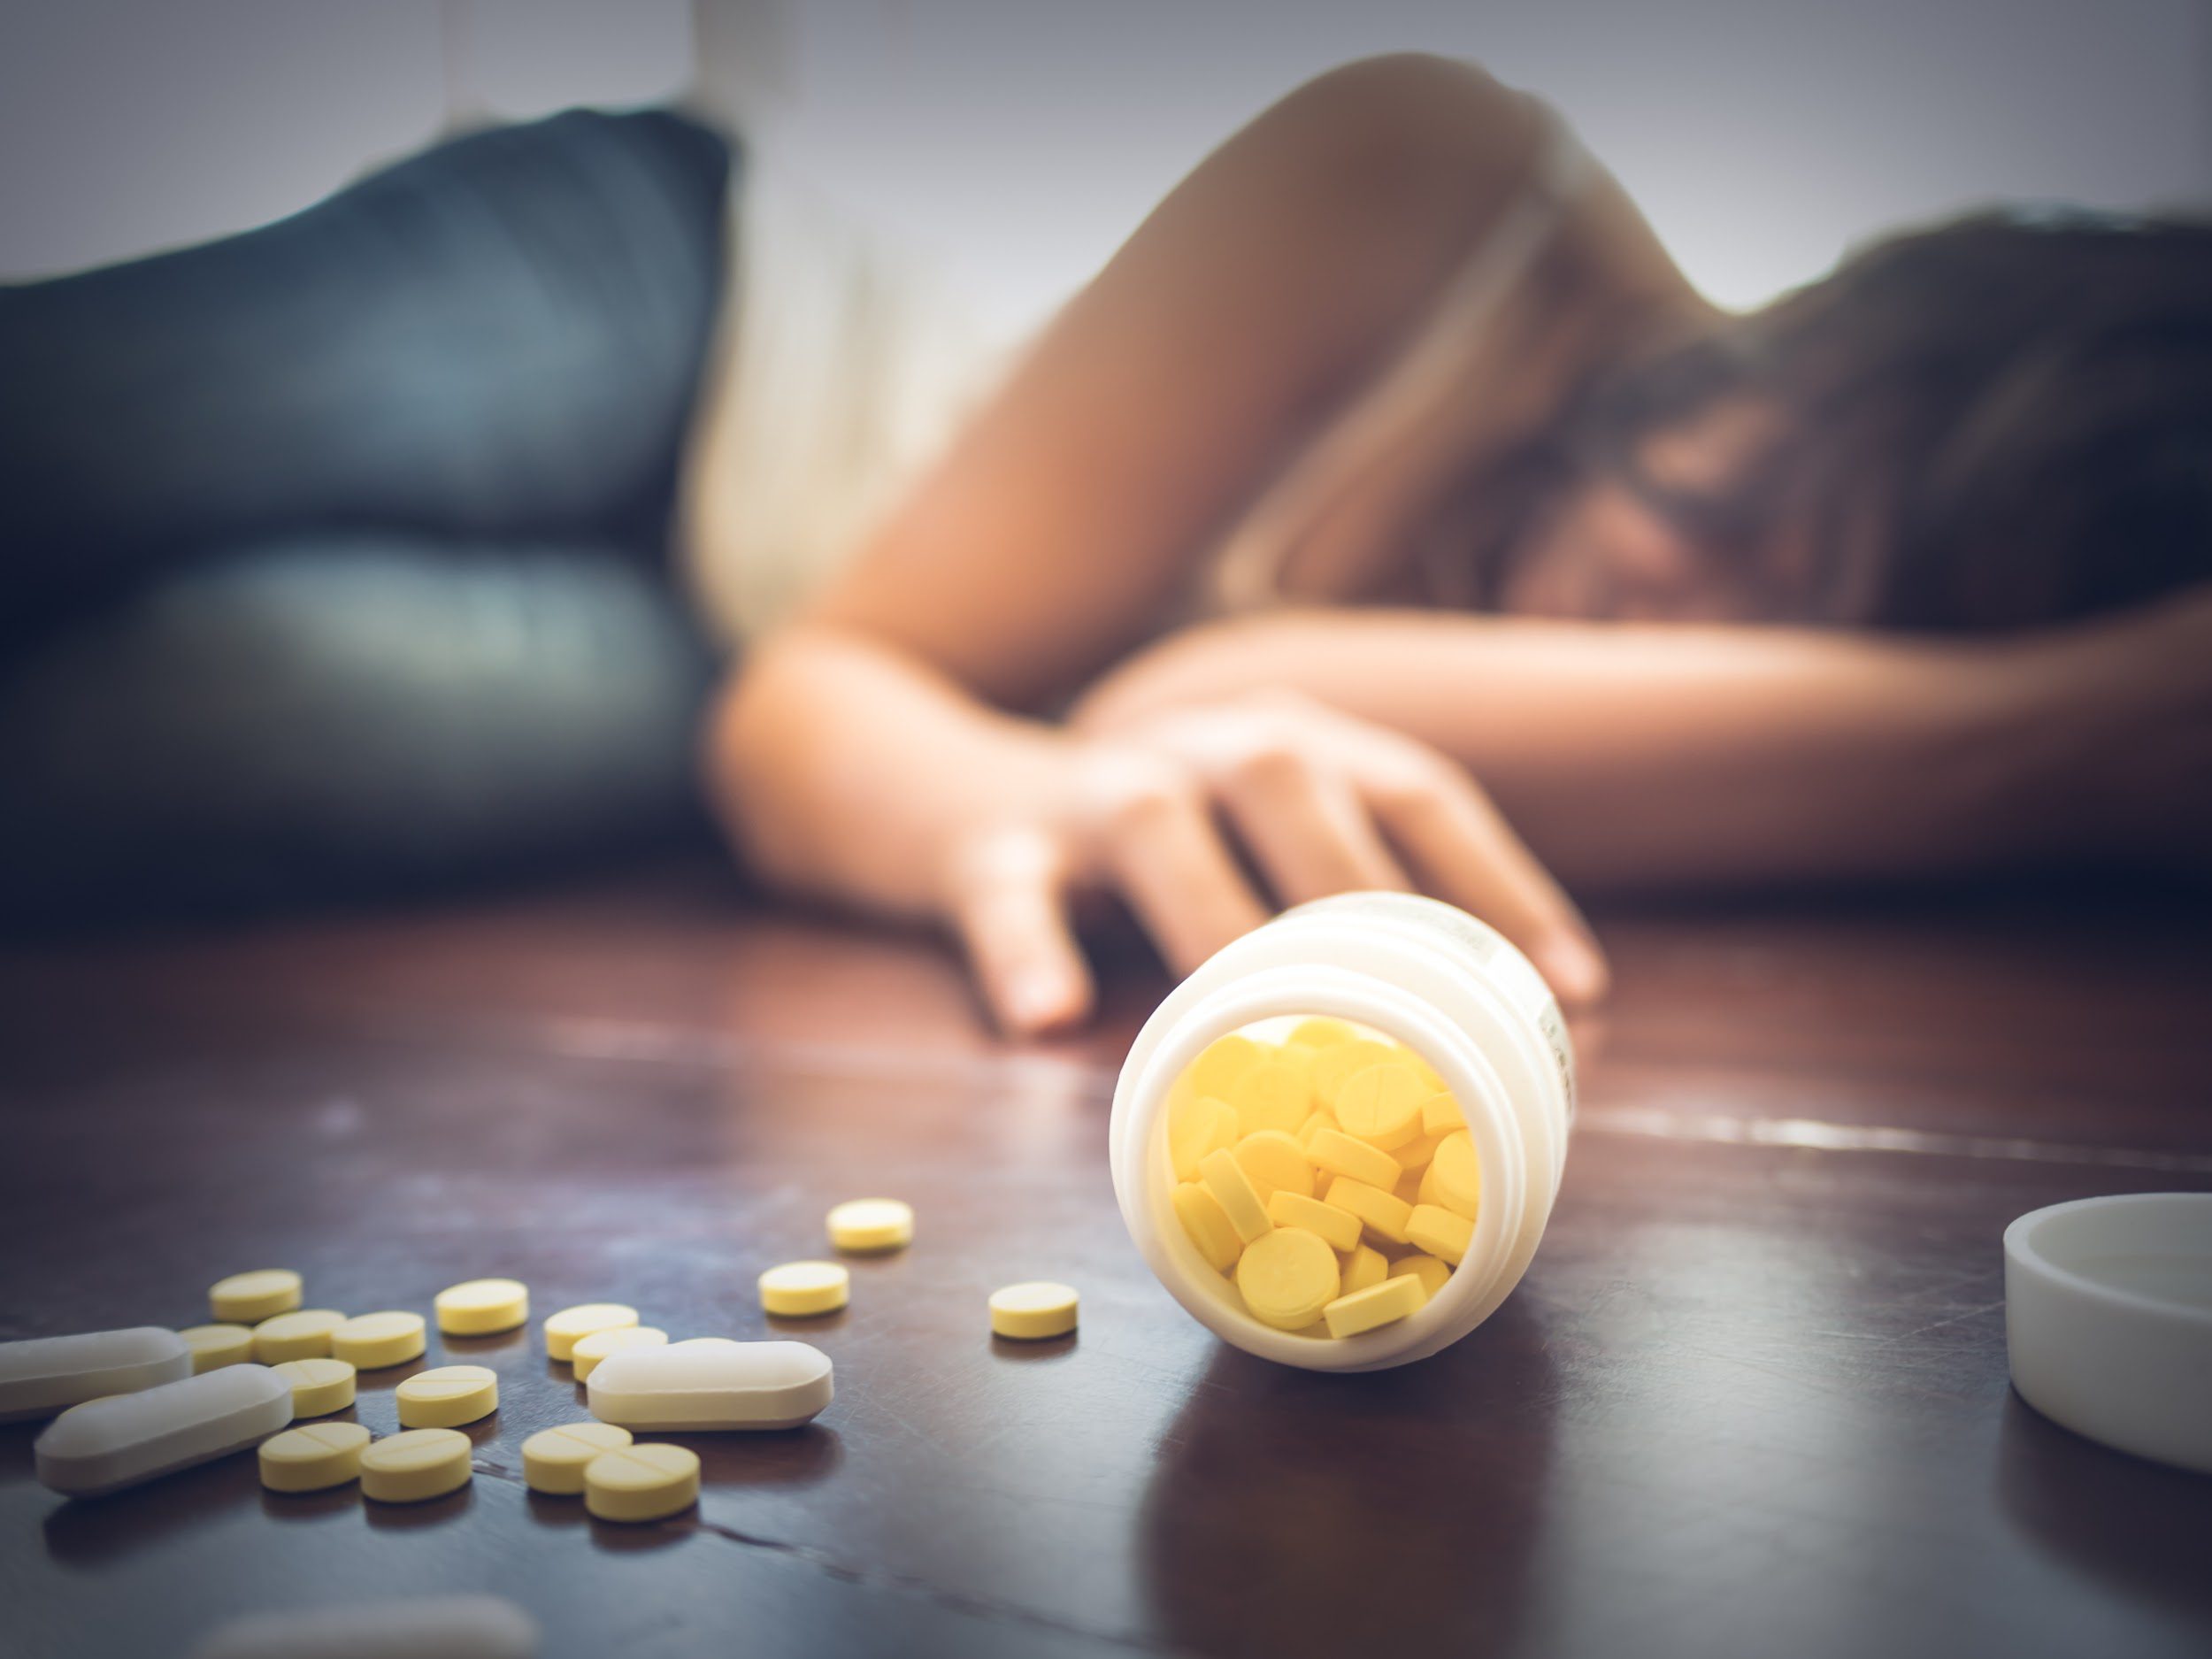 Woman taking medicine overdose and lying on the wooden floor with open pills bottle